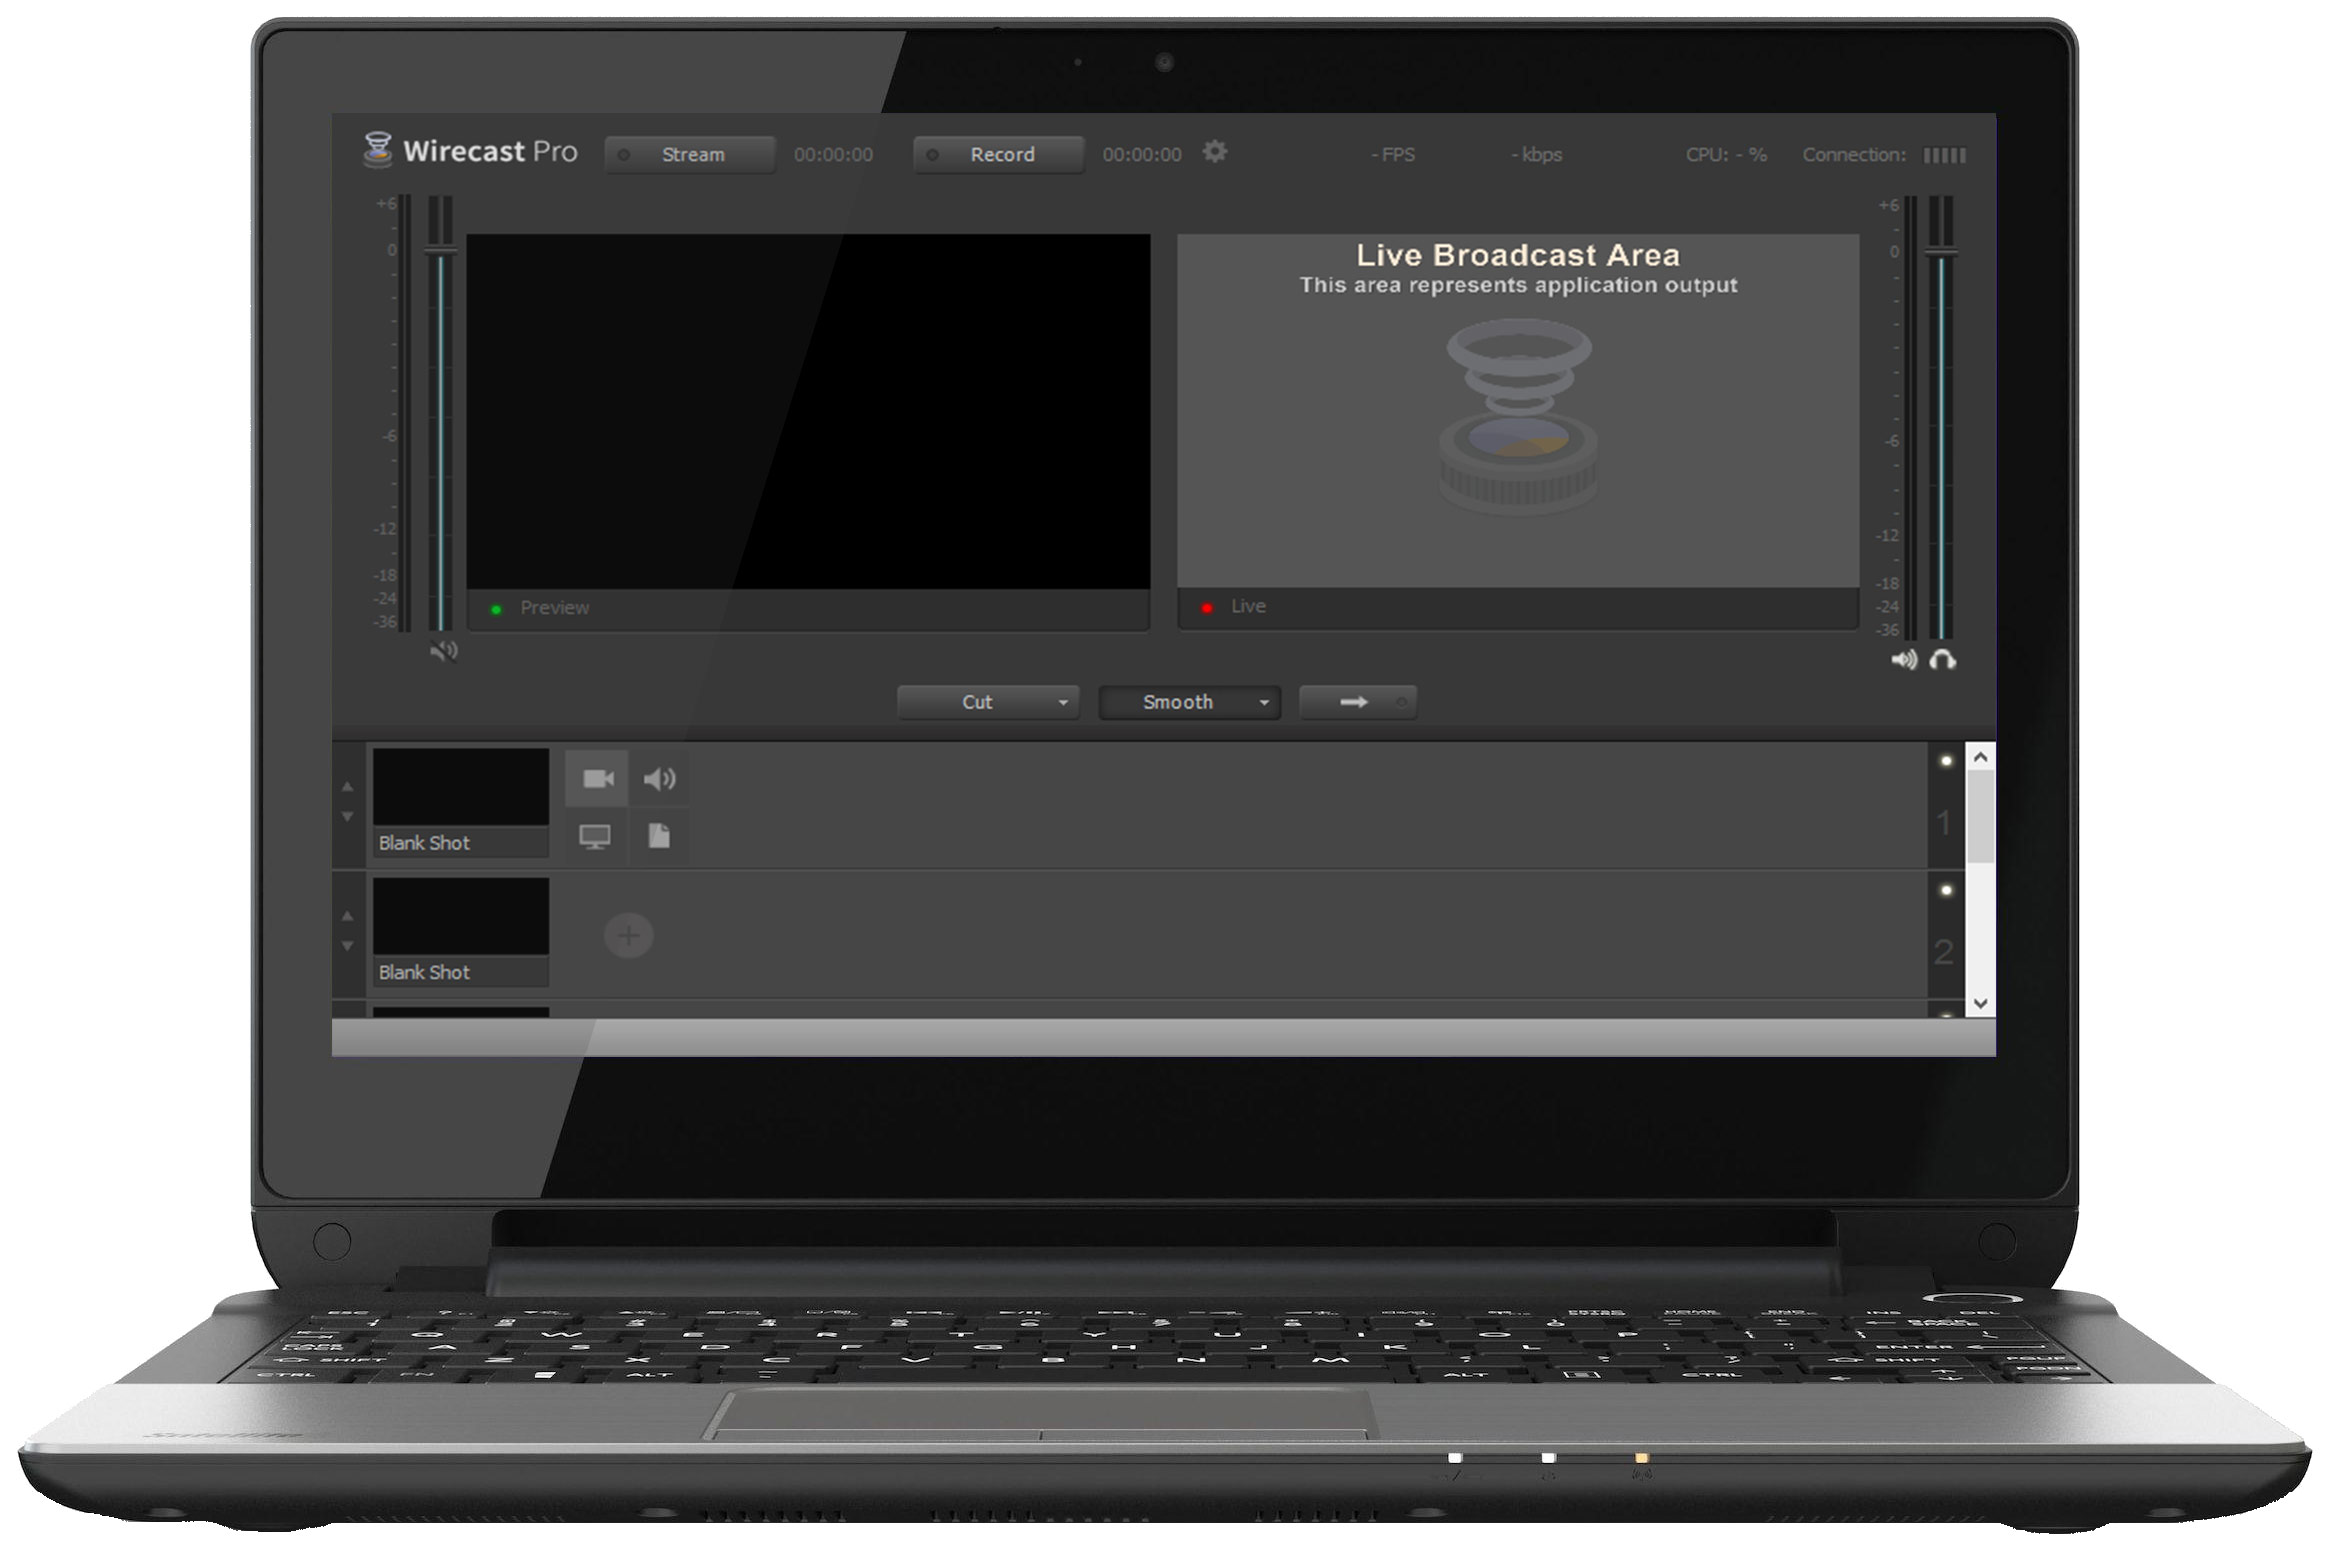 wirecast live streaming software